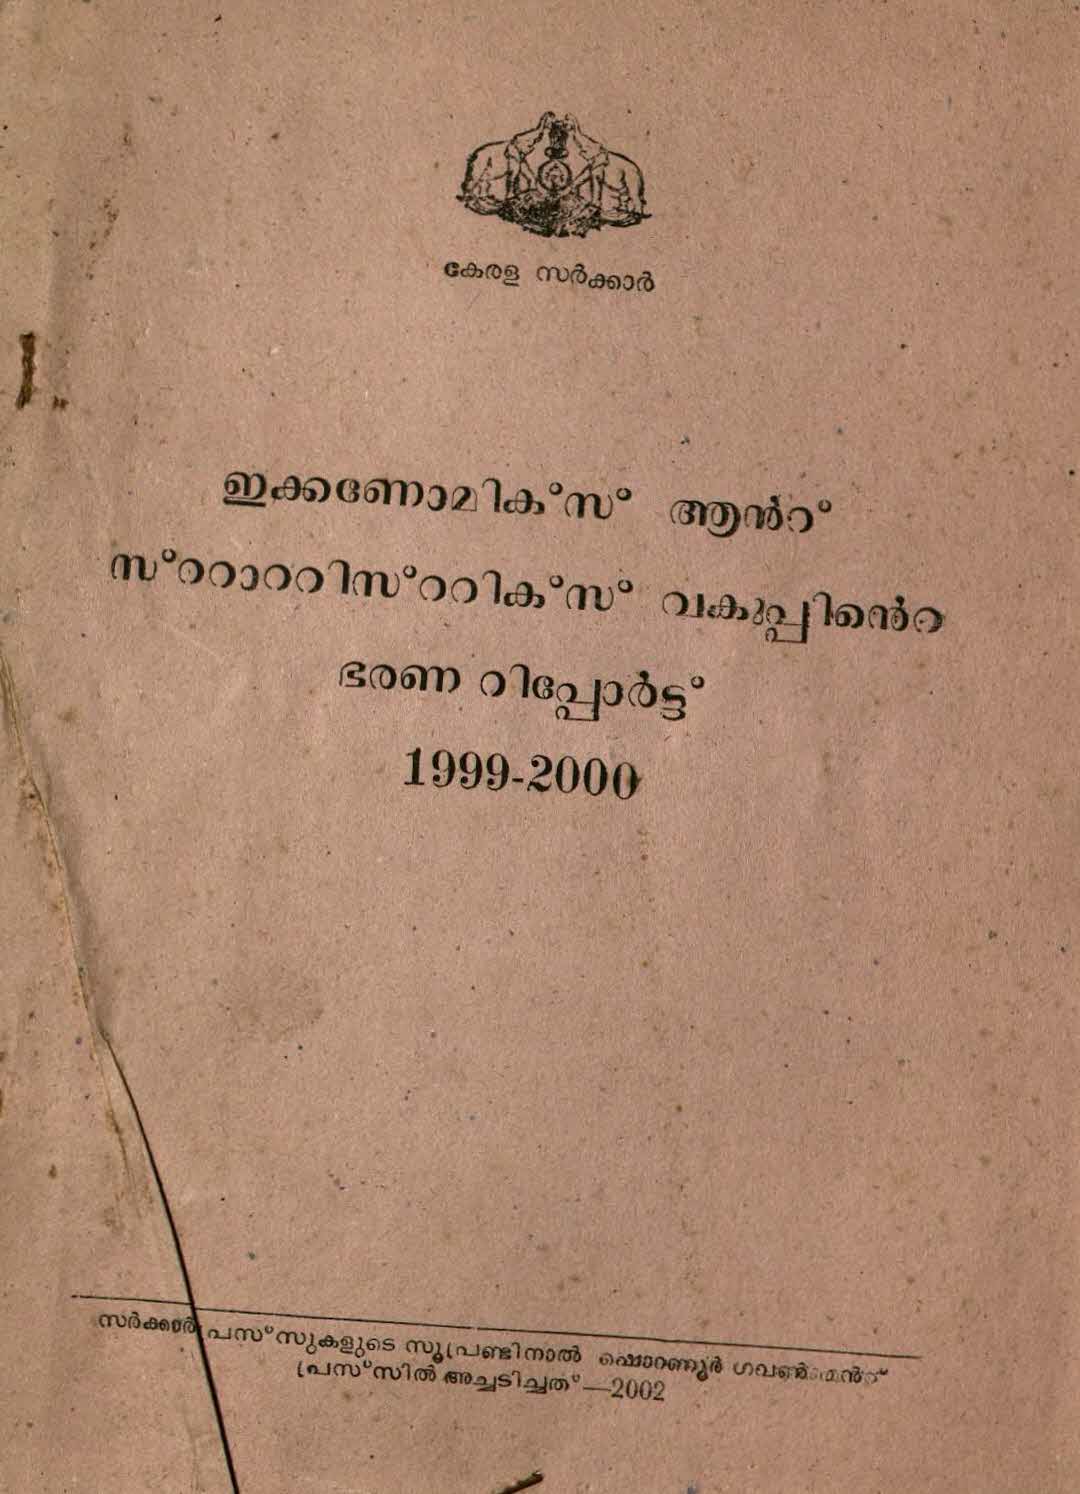 Administration Report 1999-2000